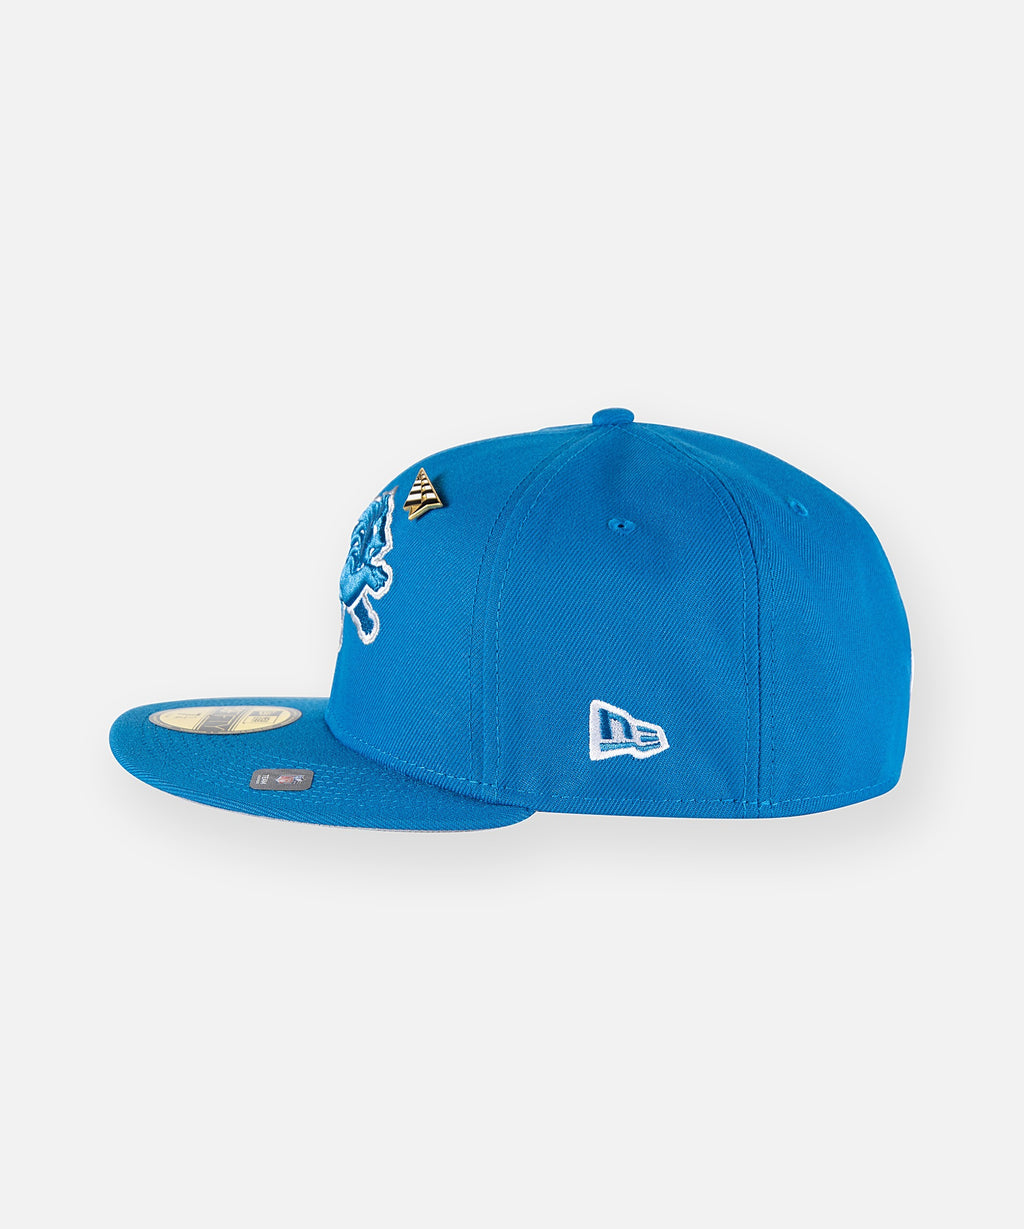 Paper Planes x Detroit Lions Team Color 59Fifty Fitted Hat_For Men_4